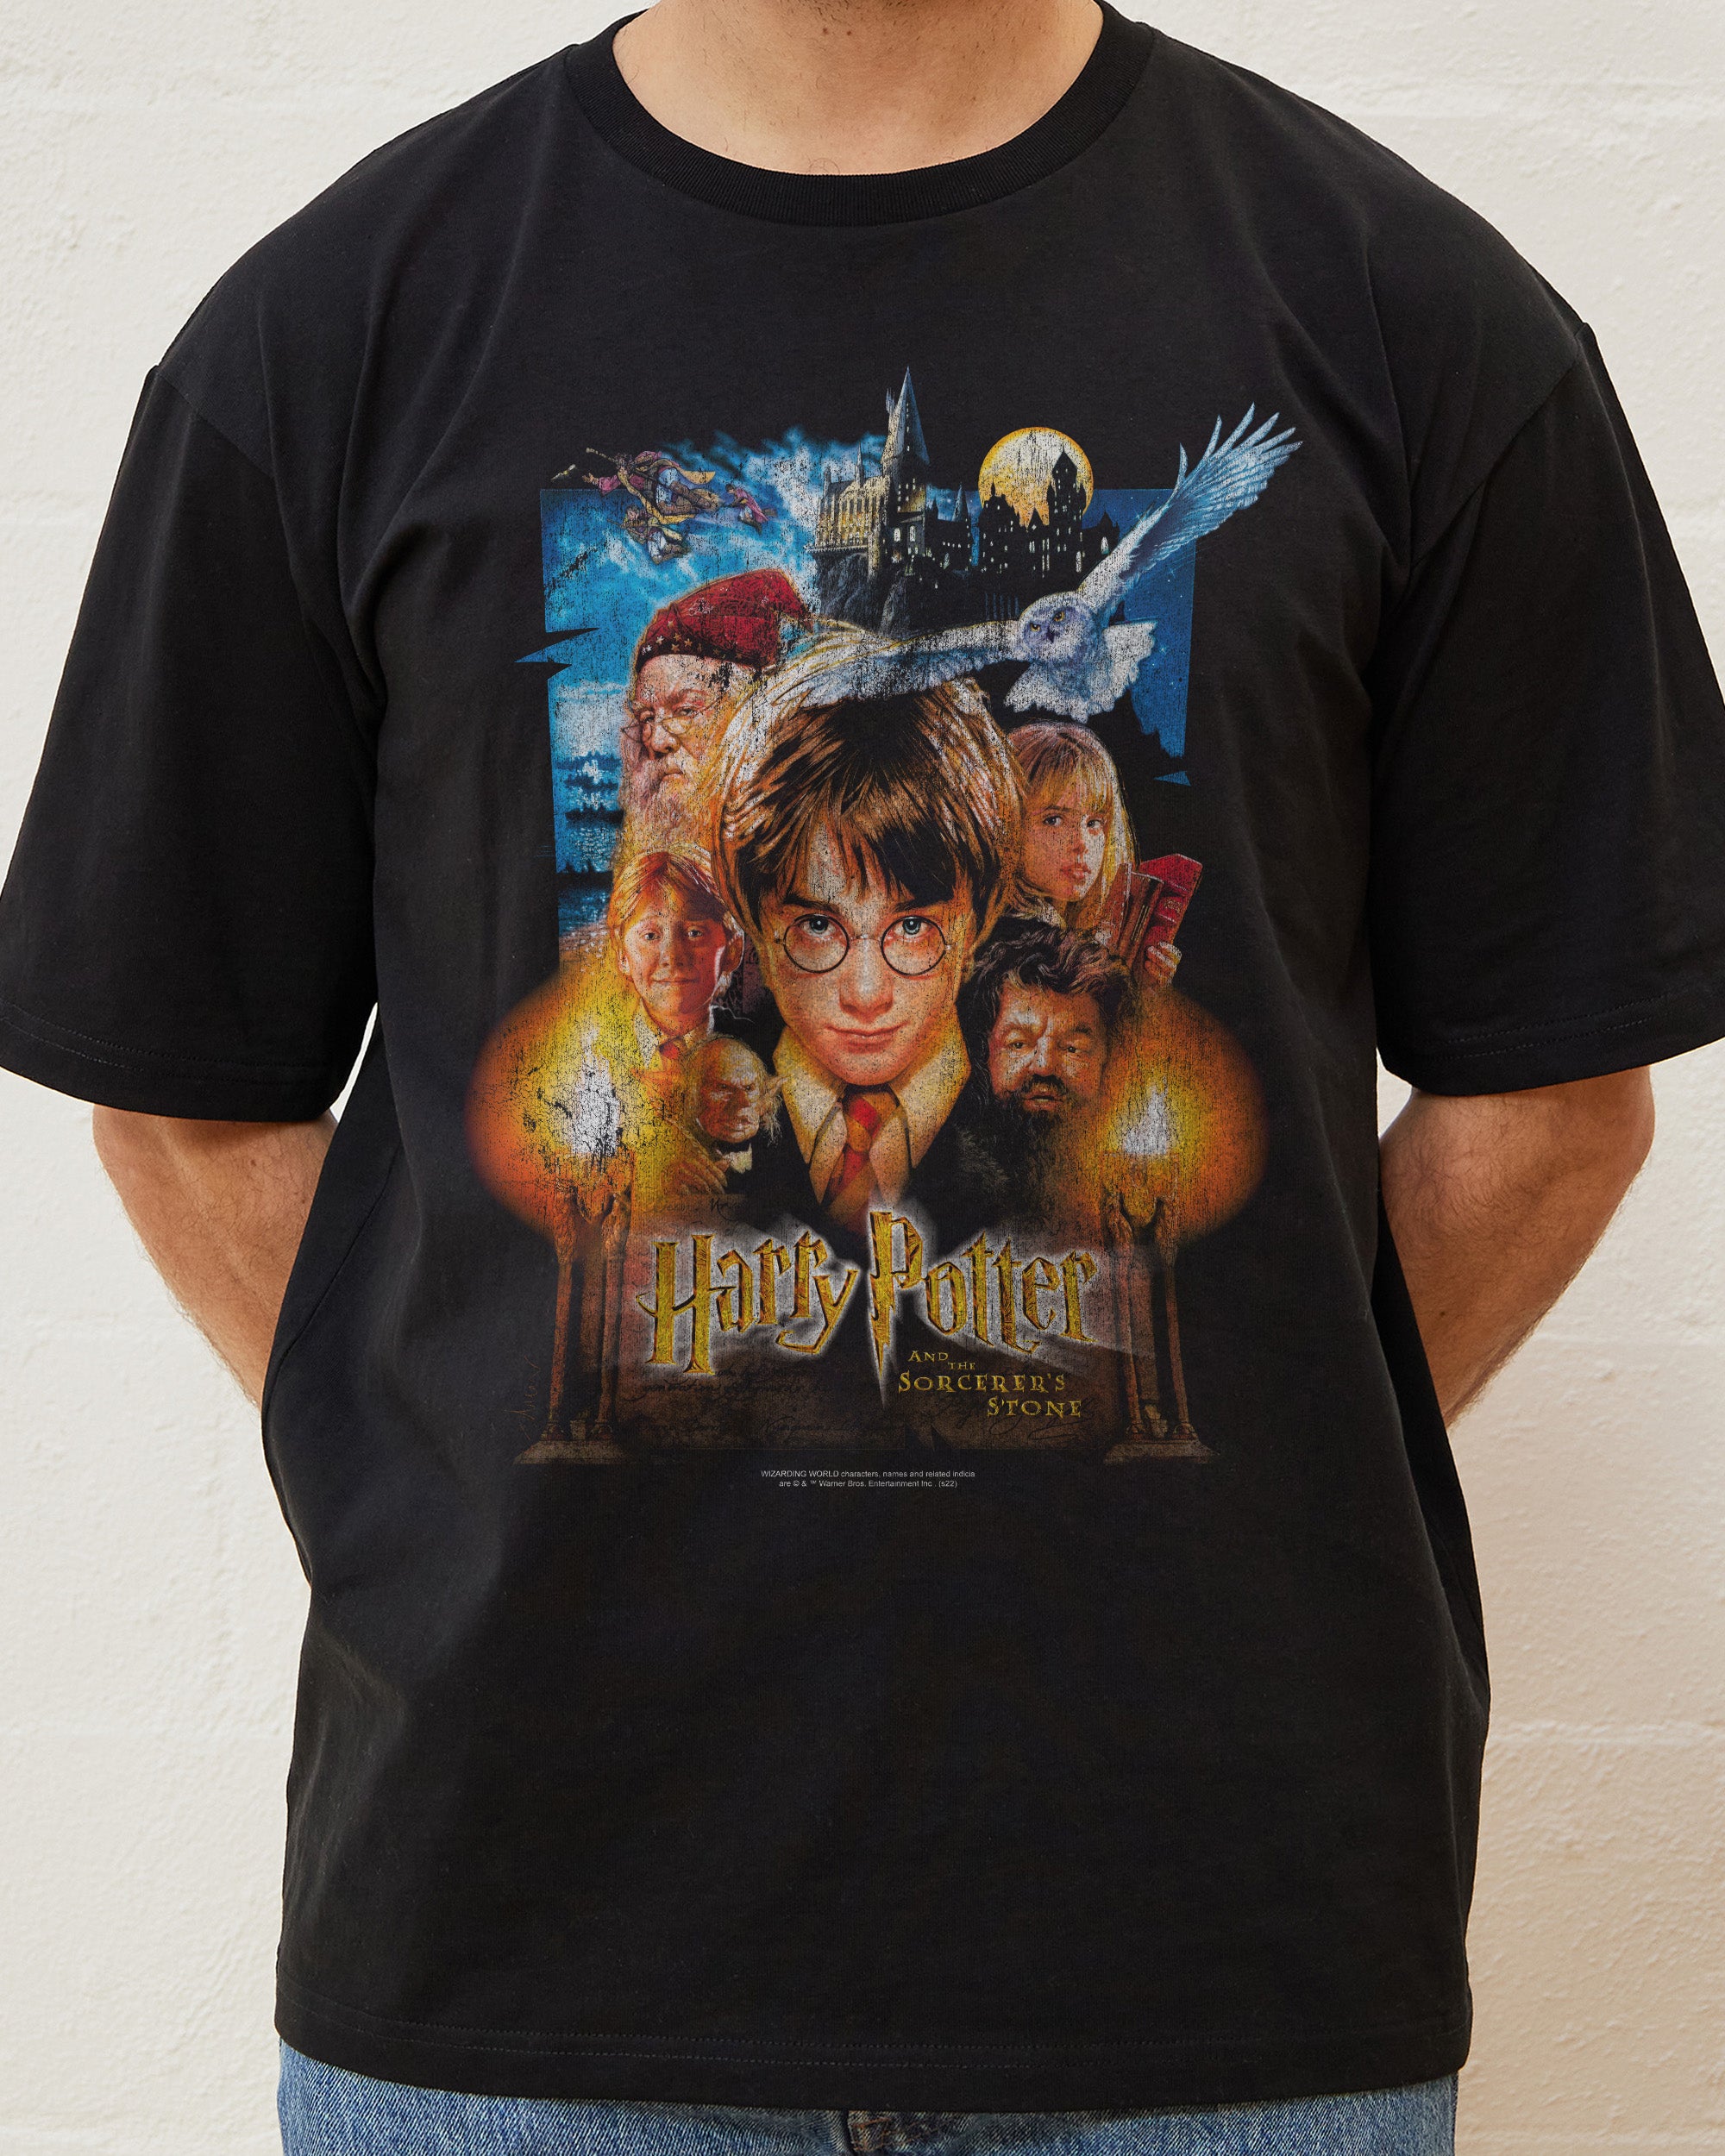 The Sorcerer's Stone Poster T-Shirt